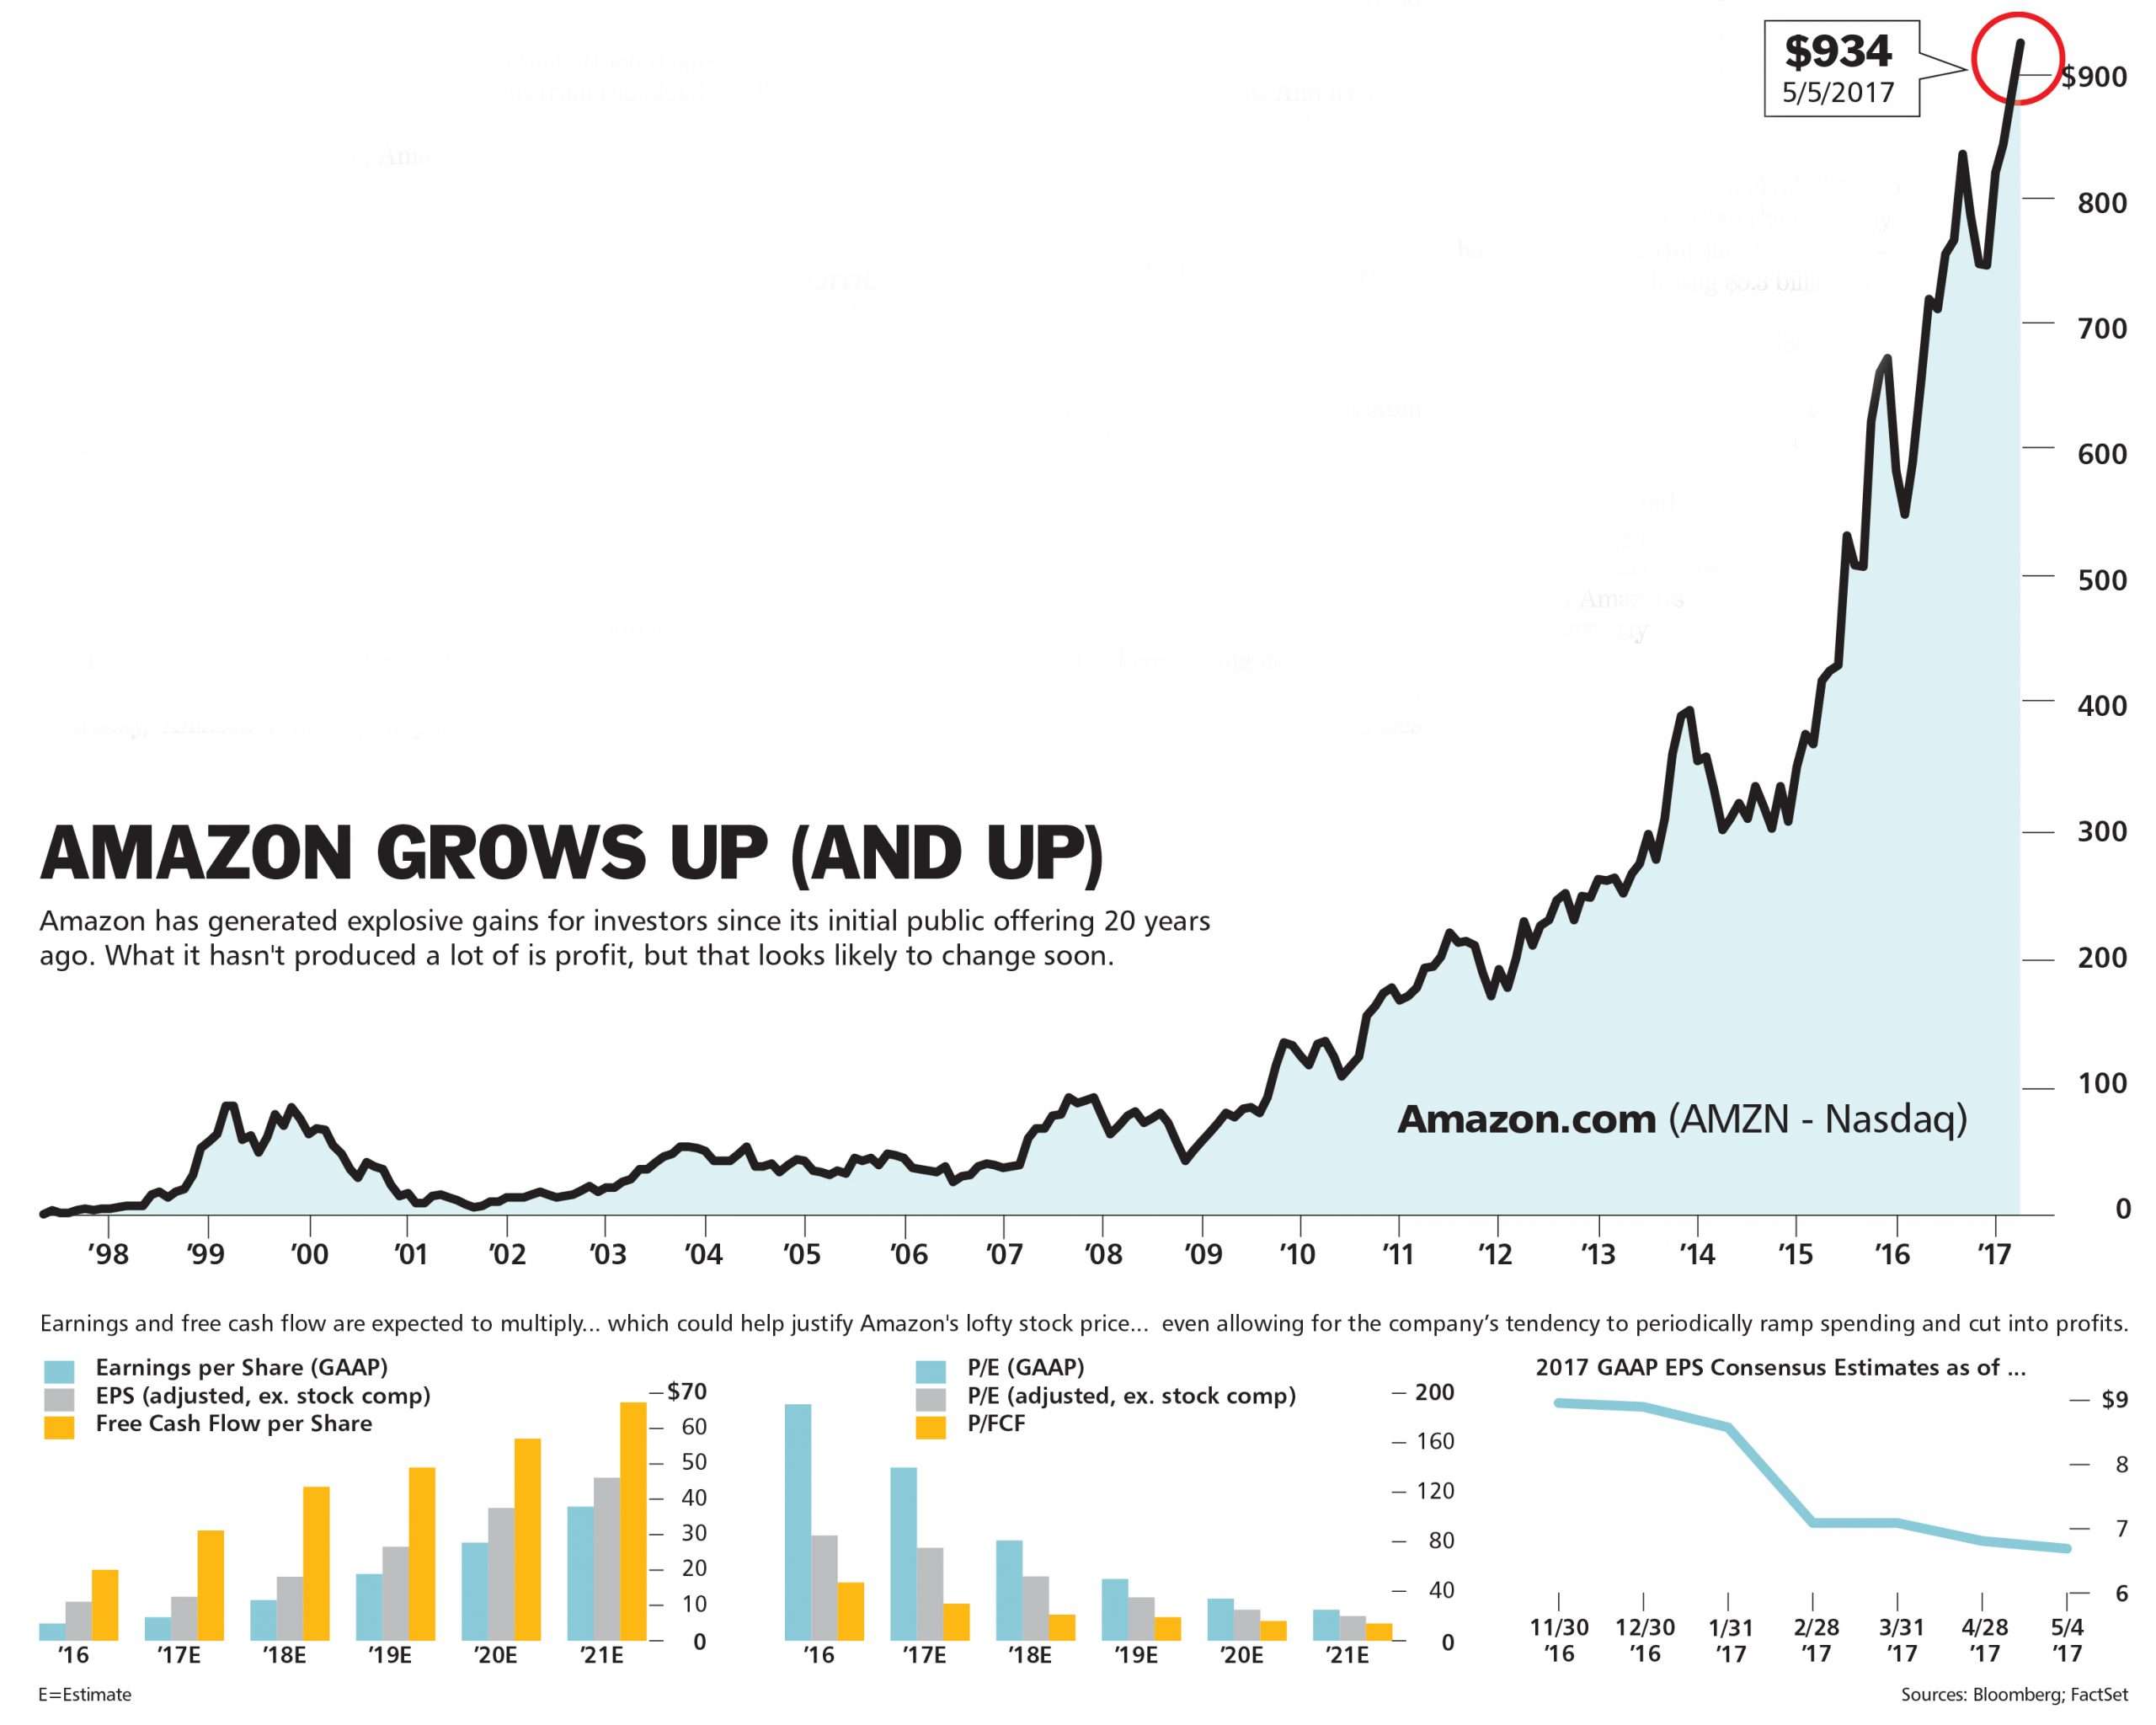 Amazons Profits Are Soaring: Why That Could Be Bad for ...